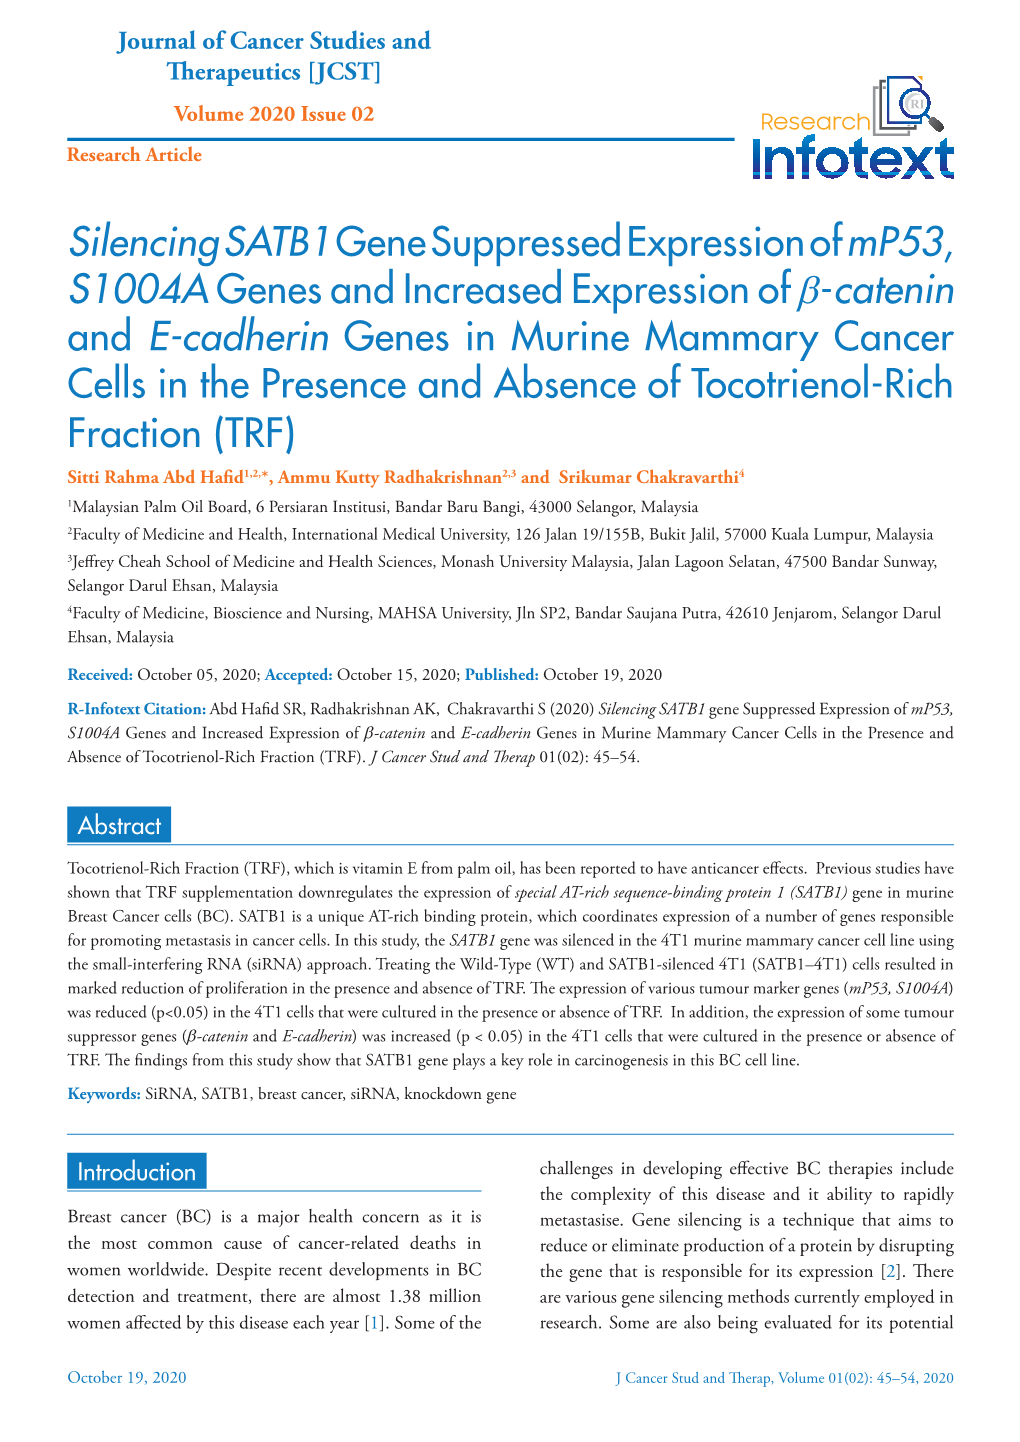 Silencingsatb1 Gene Suppressed Expression of Mp53, S1004A